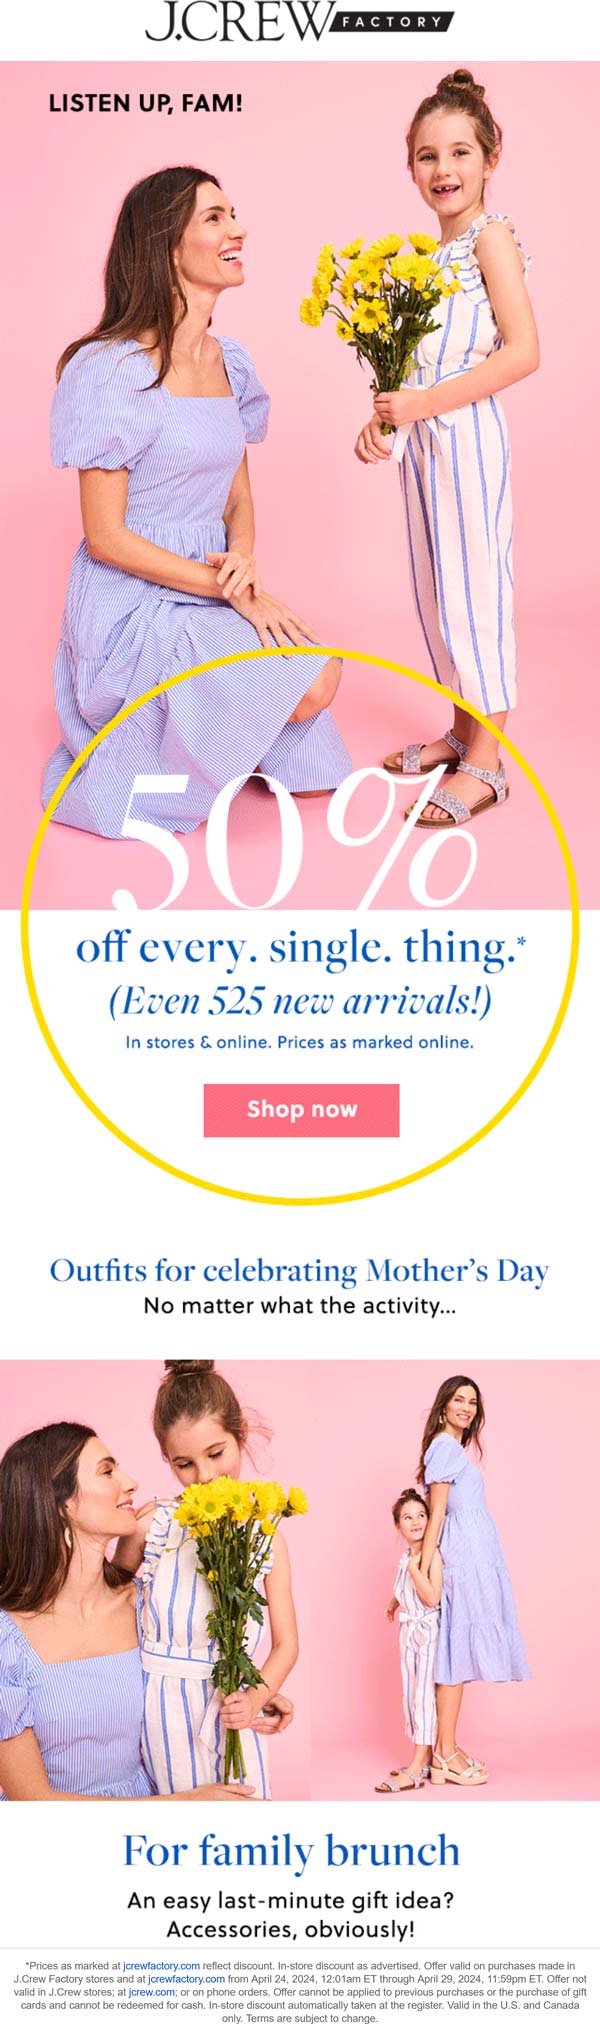 J.Crew Factory stores Coupon  50% off everything at J.Crew Factory, ditto online #jcrewfactory 